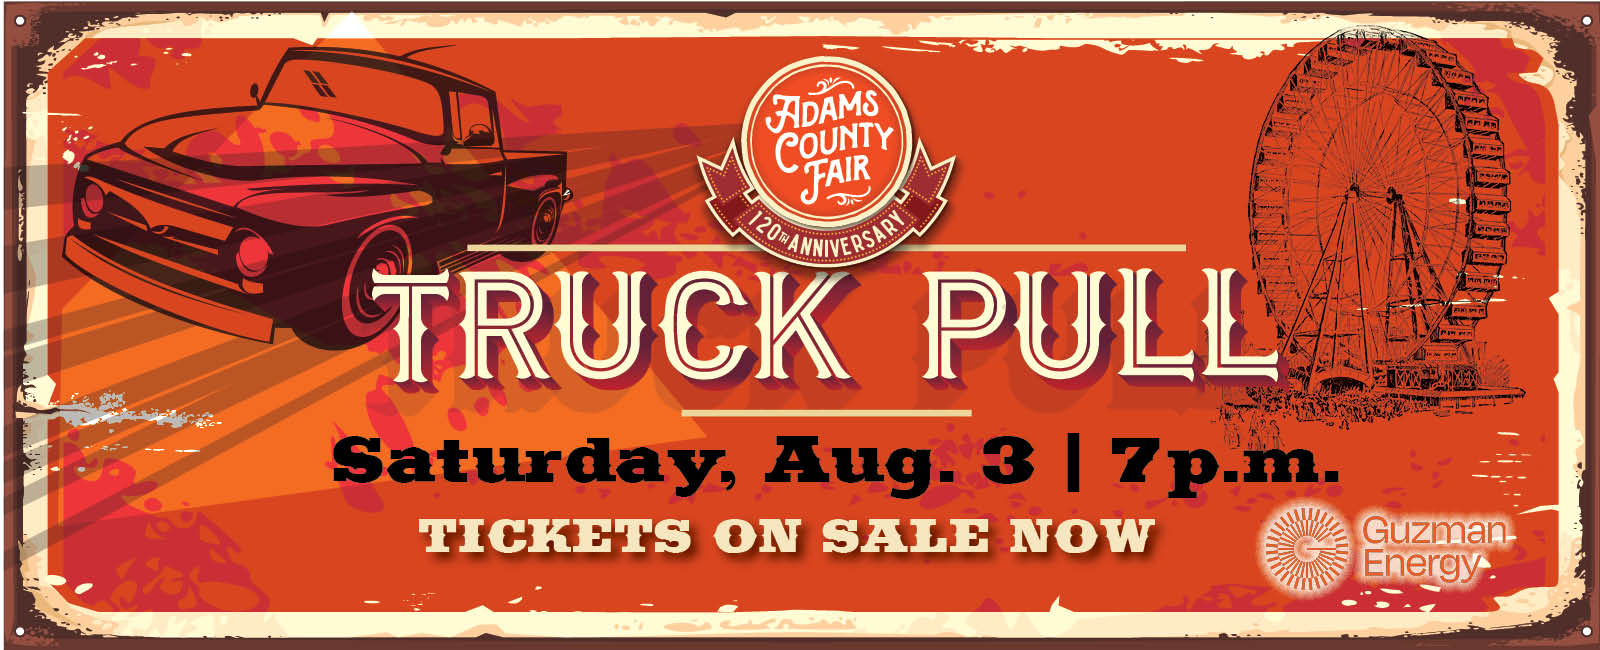 Tickets on sale for Truck Pull